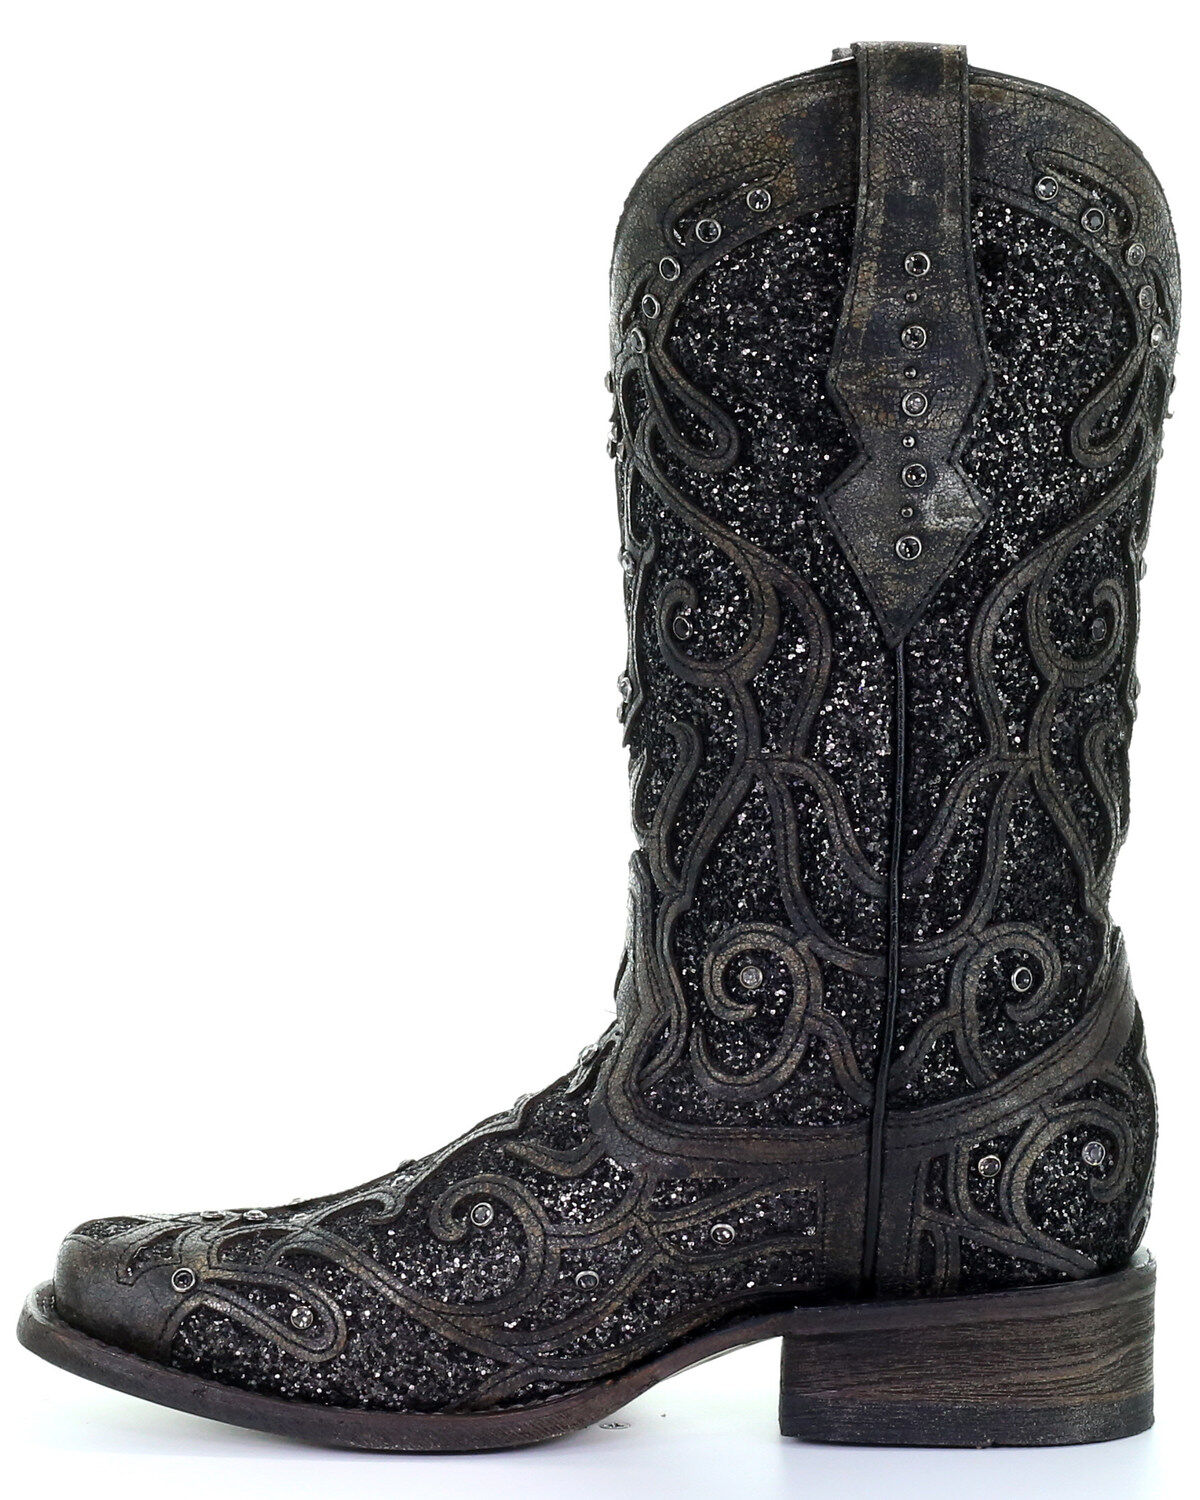 Corral Womens Sparkling Glitter Inlay Black/Silver Cowboy Boots